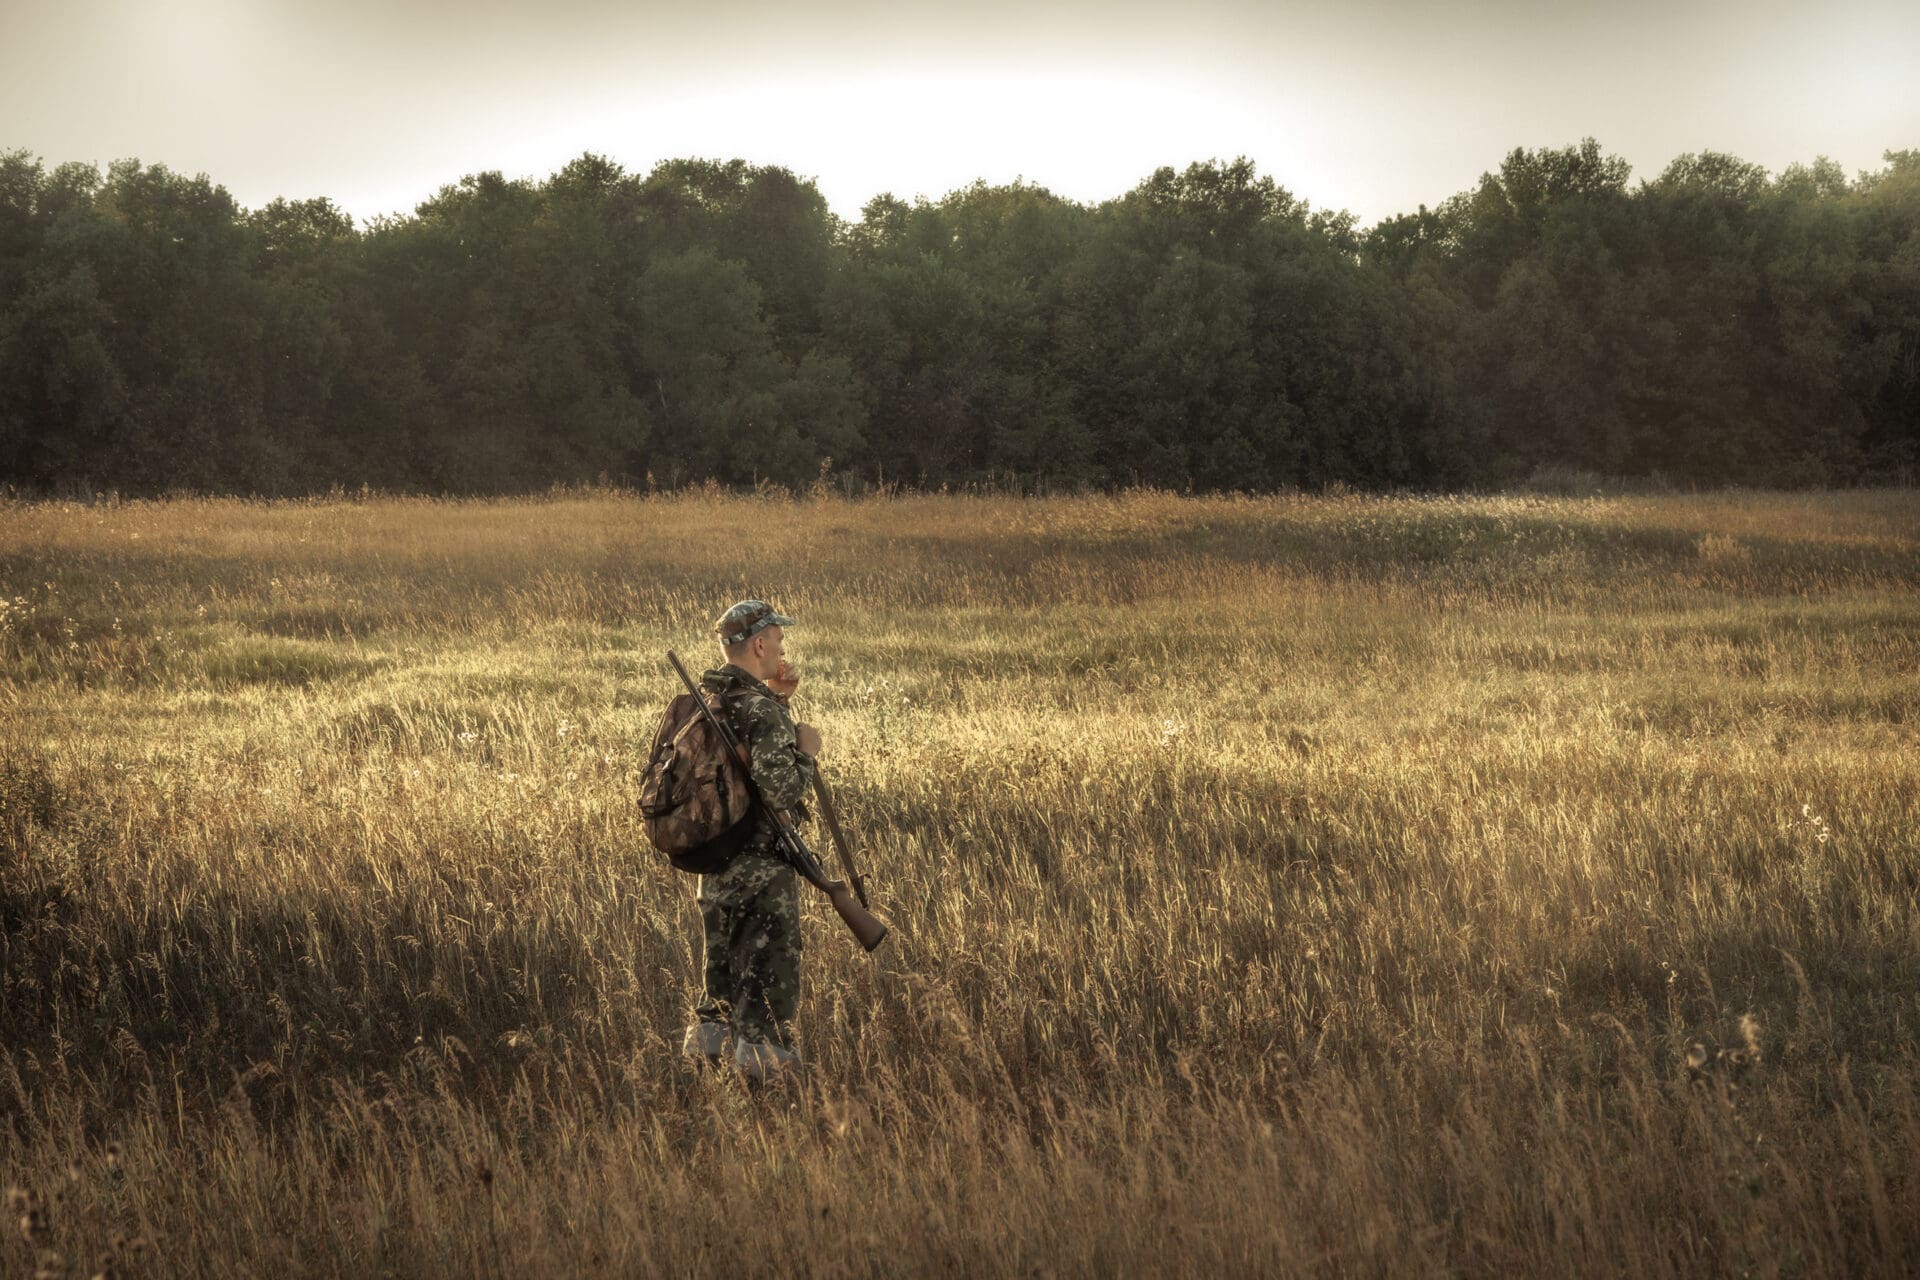 Hunter Hunting In Rural Field Nearby Woodland At Sunset During